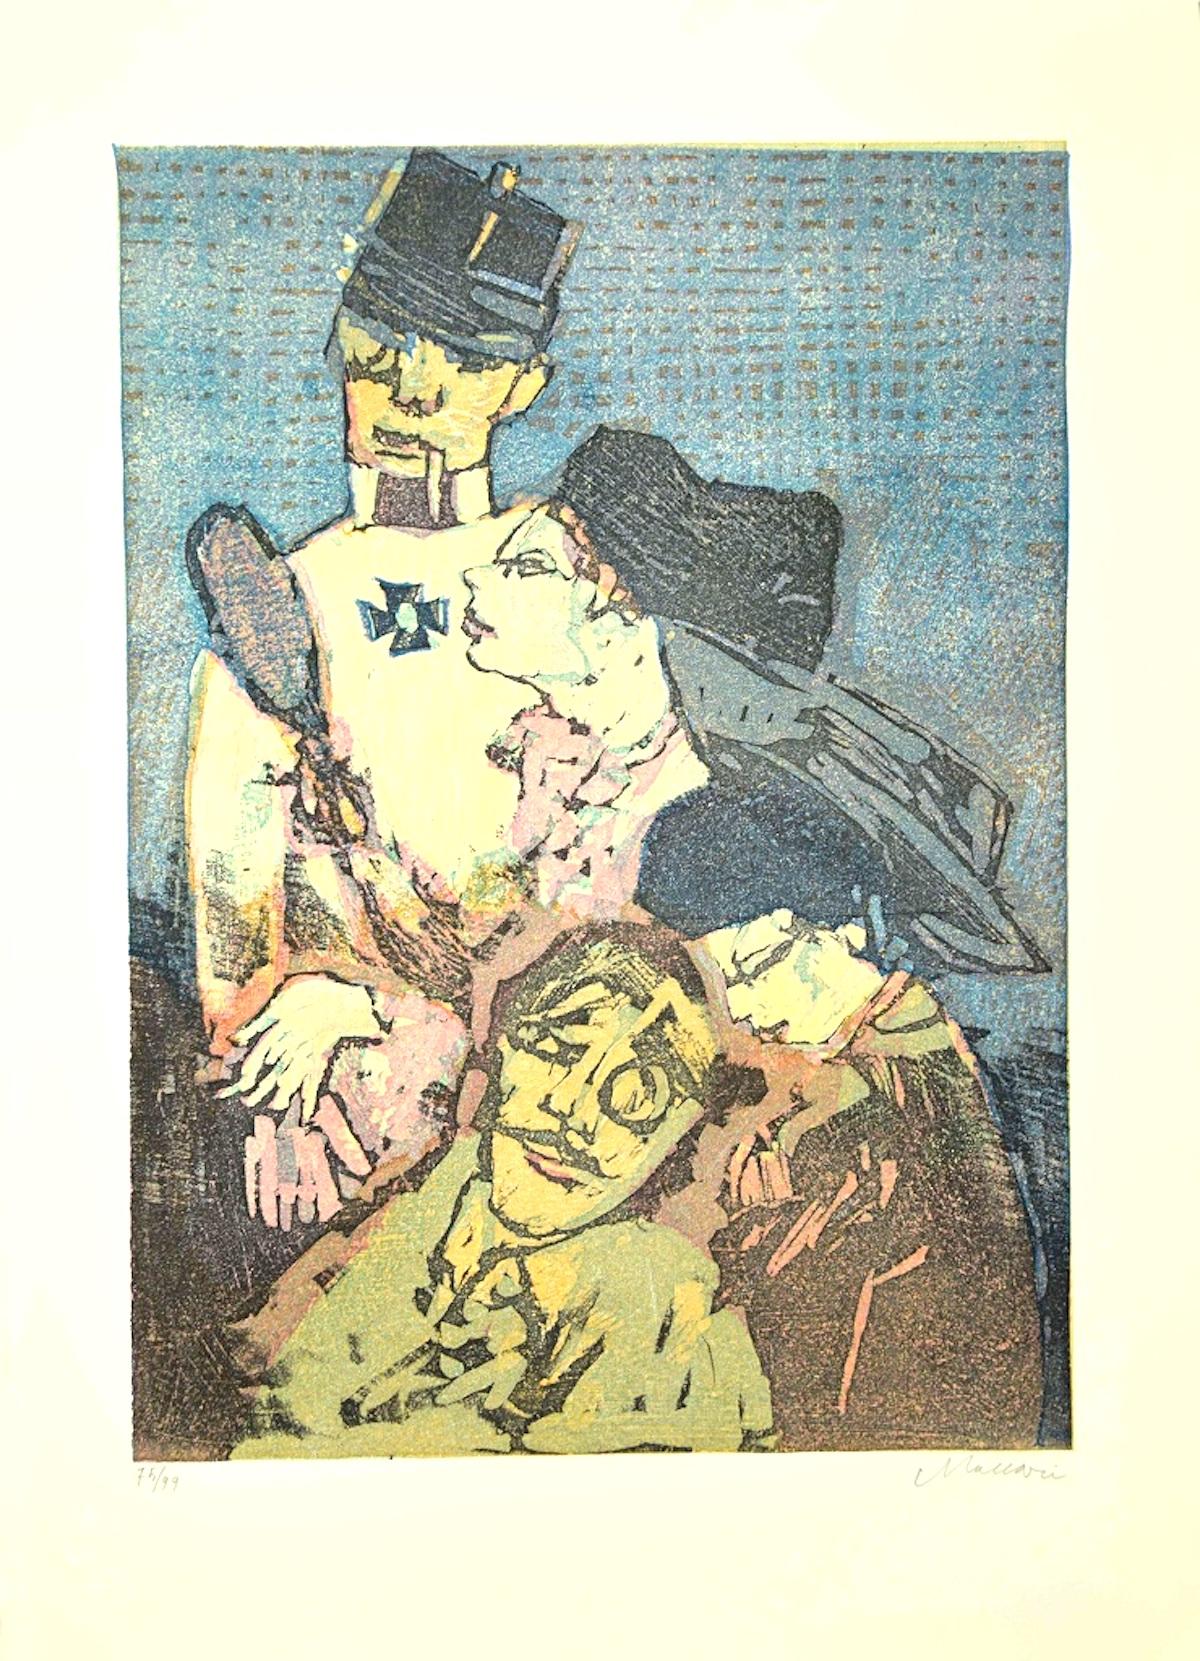 Soldier and Women - Woodcut by Mino Maccari - 1960s